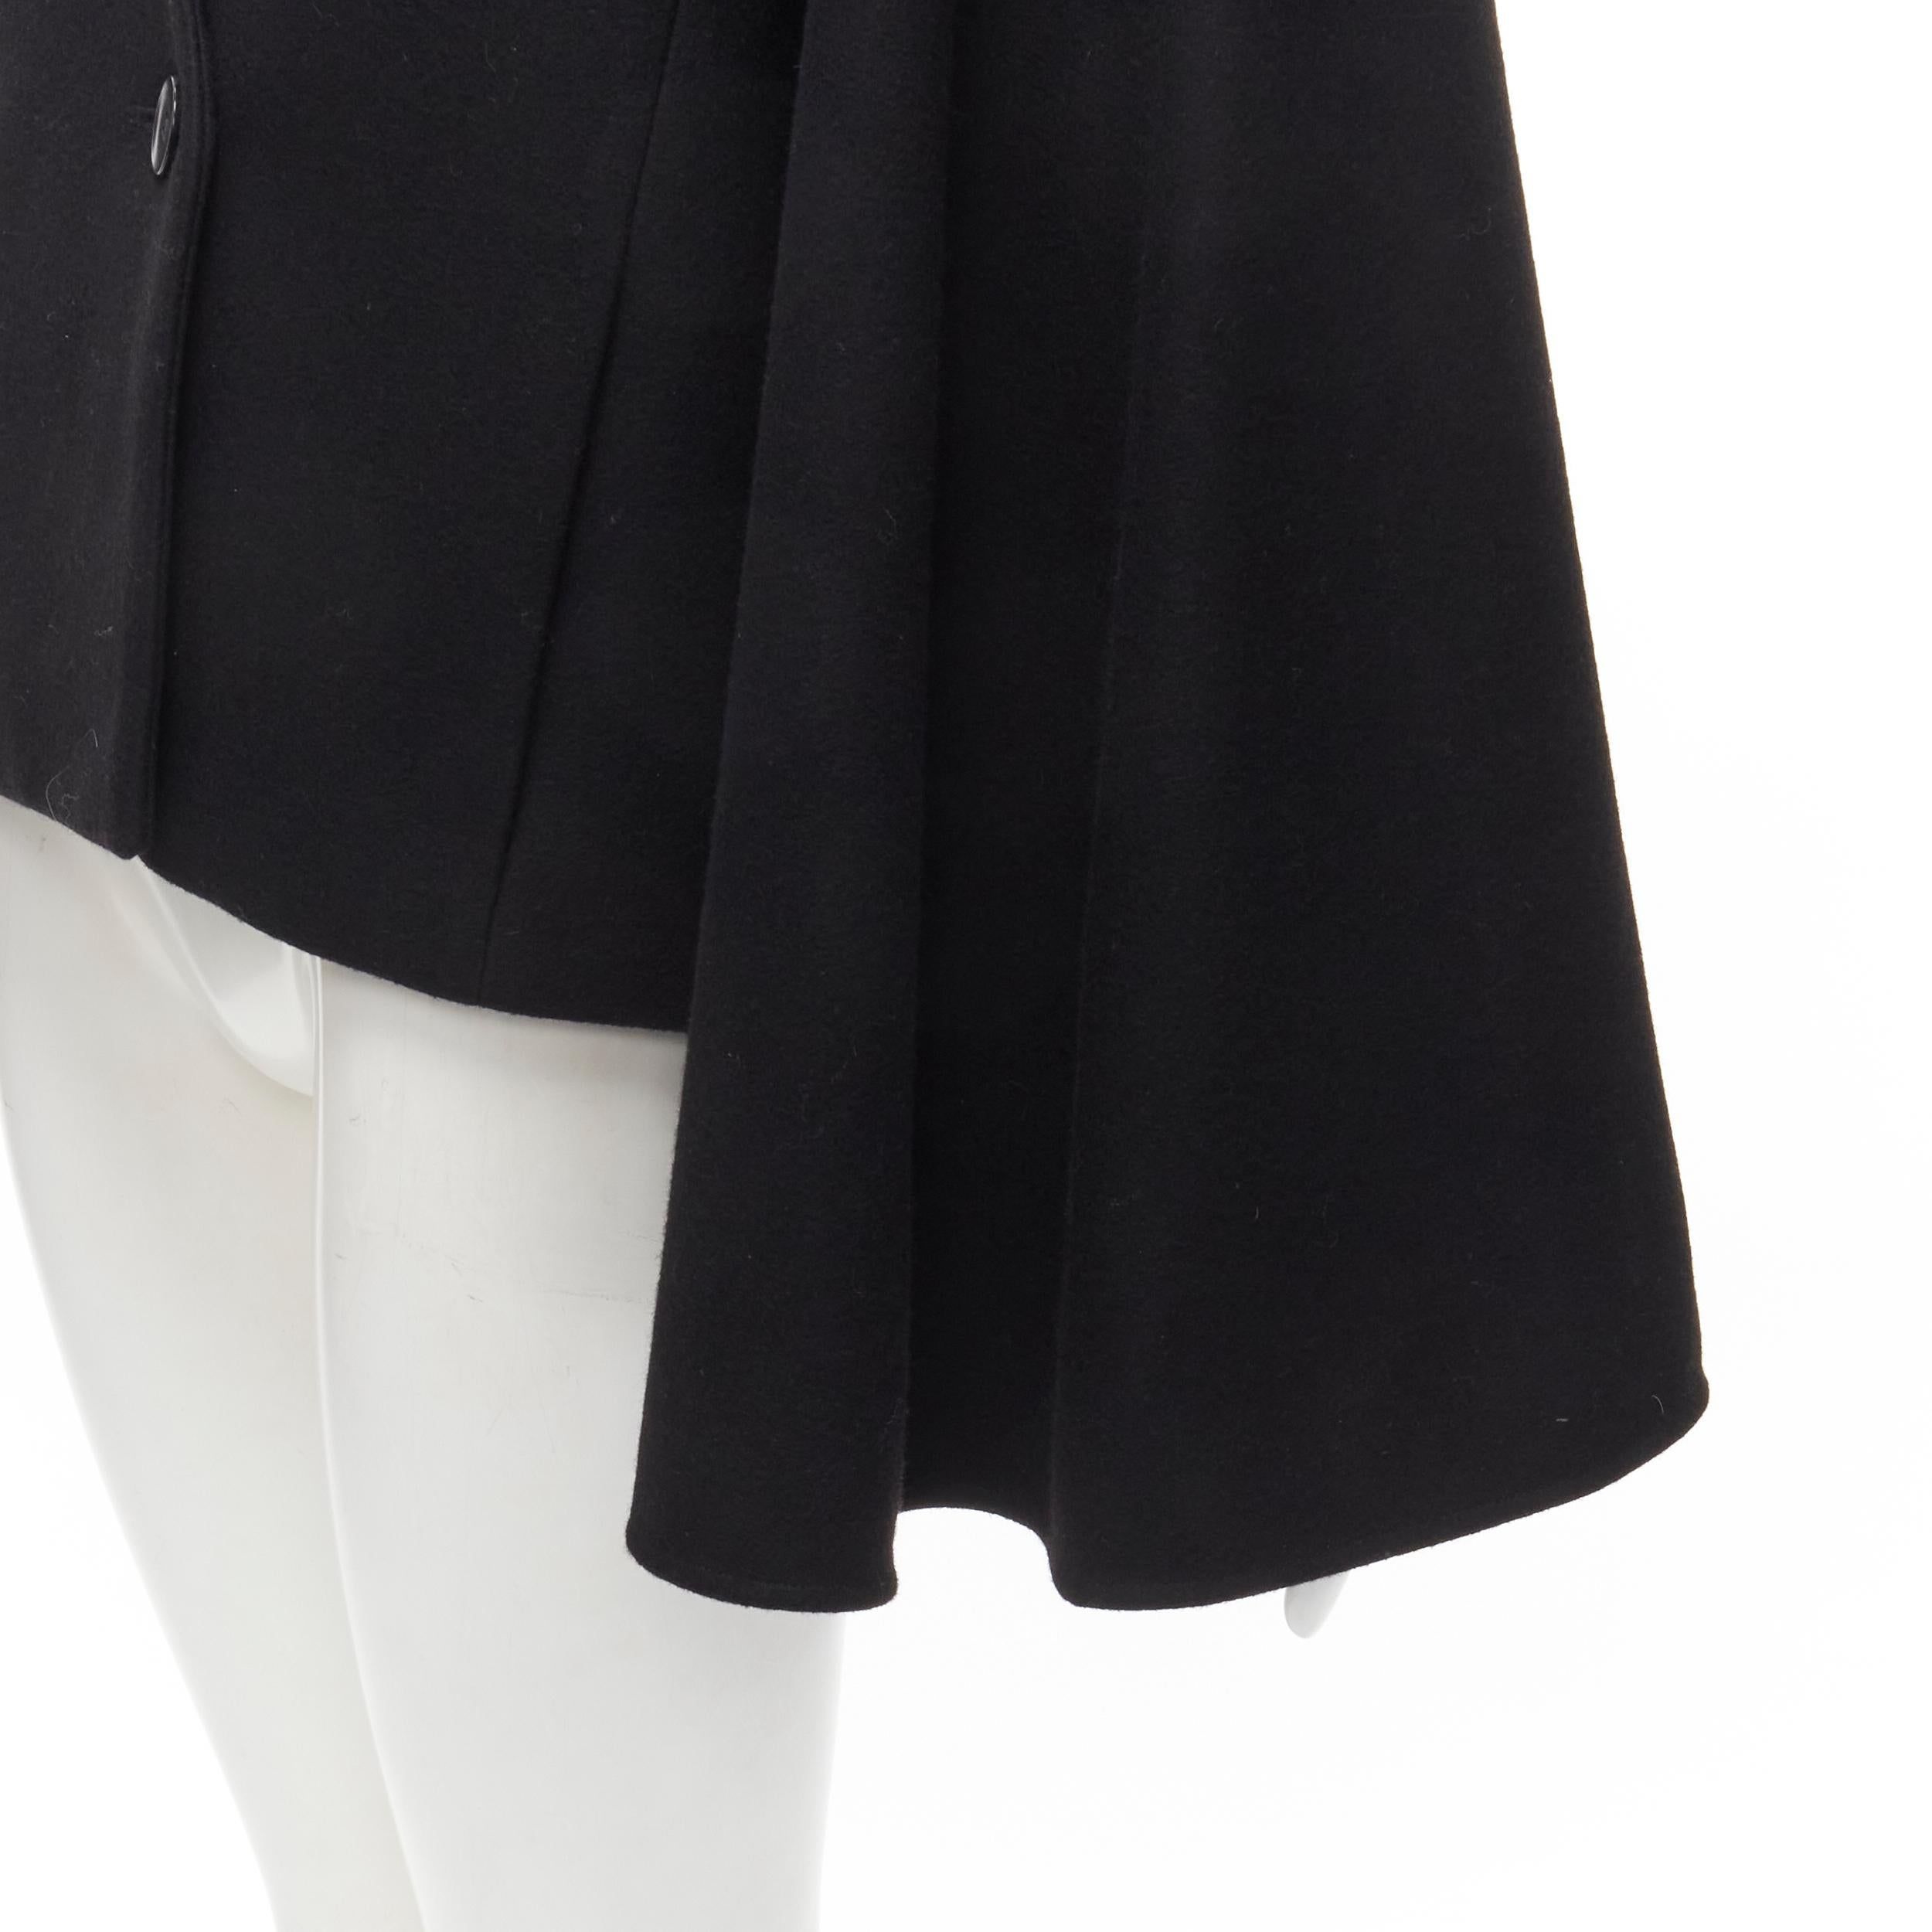 TIBI black virgin wool blend asymmetric cape sleeve button blazer jacket S
Reference: YNWG/A00158
Brand: Tibi
Material: Virgin Wool, Blend
Color: Black
Pattern: Solid
Closure: Button
Lining: Fabric
Made in: China

CONDITION:
Condition: Excellent,